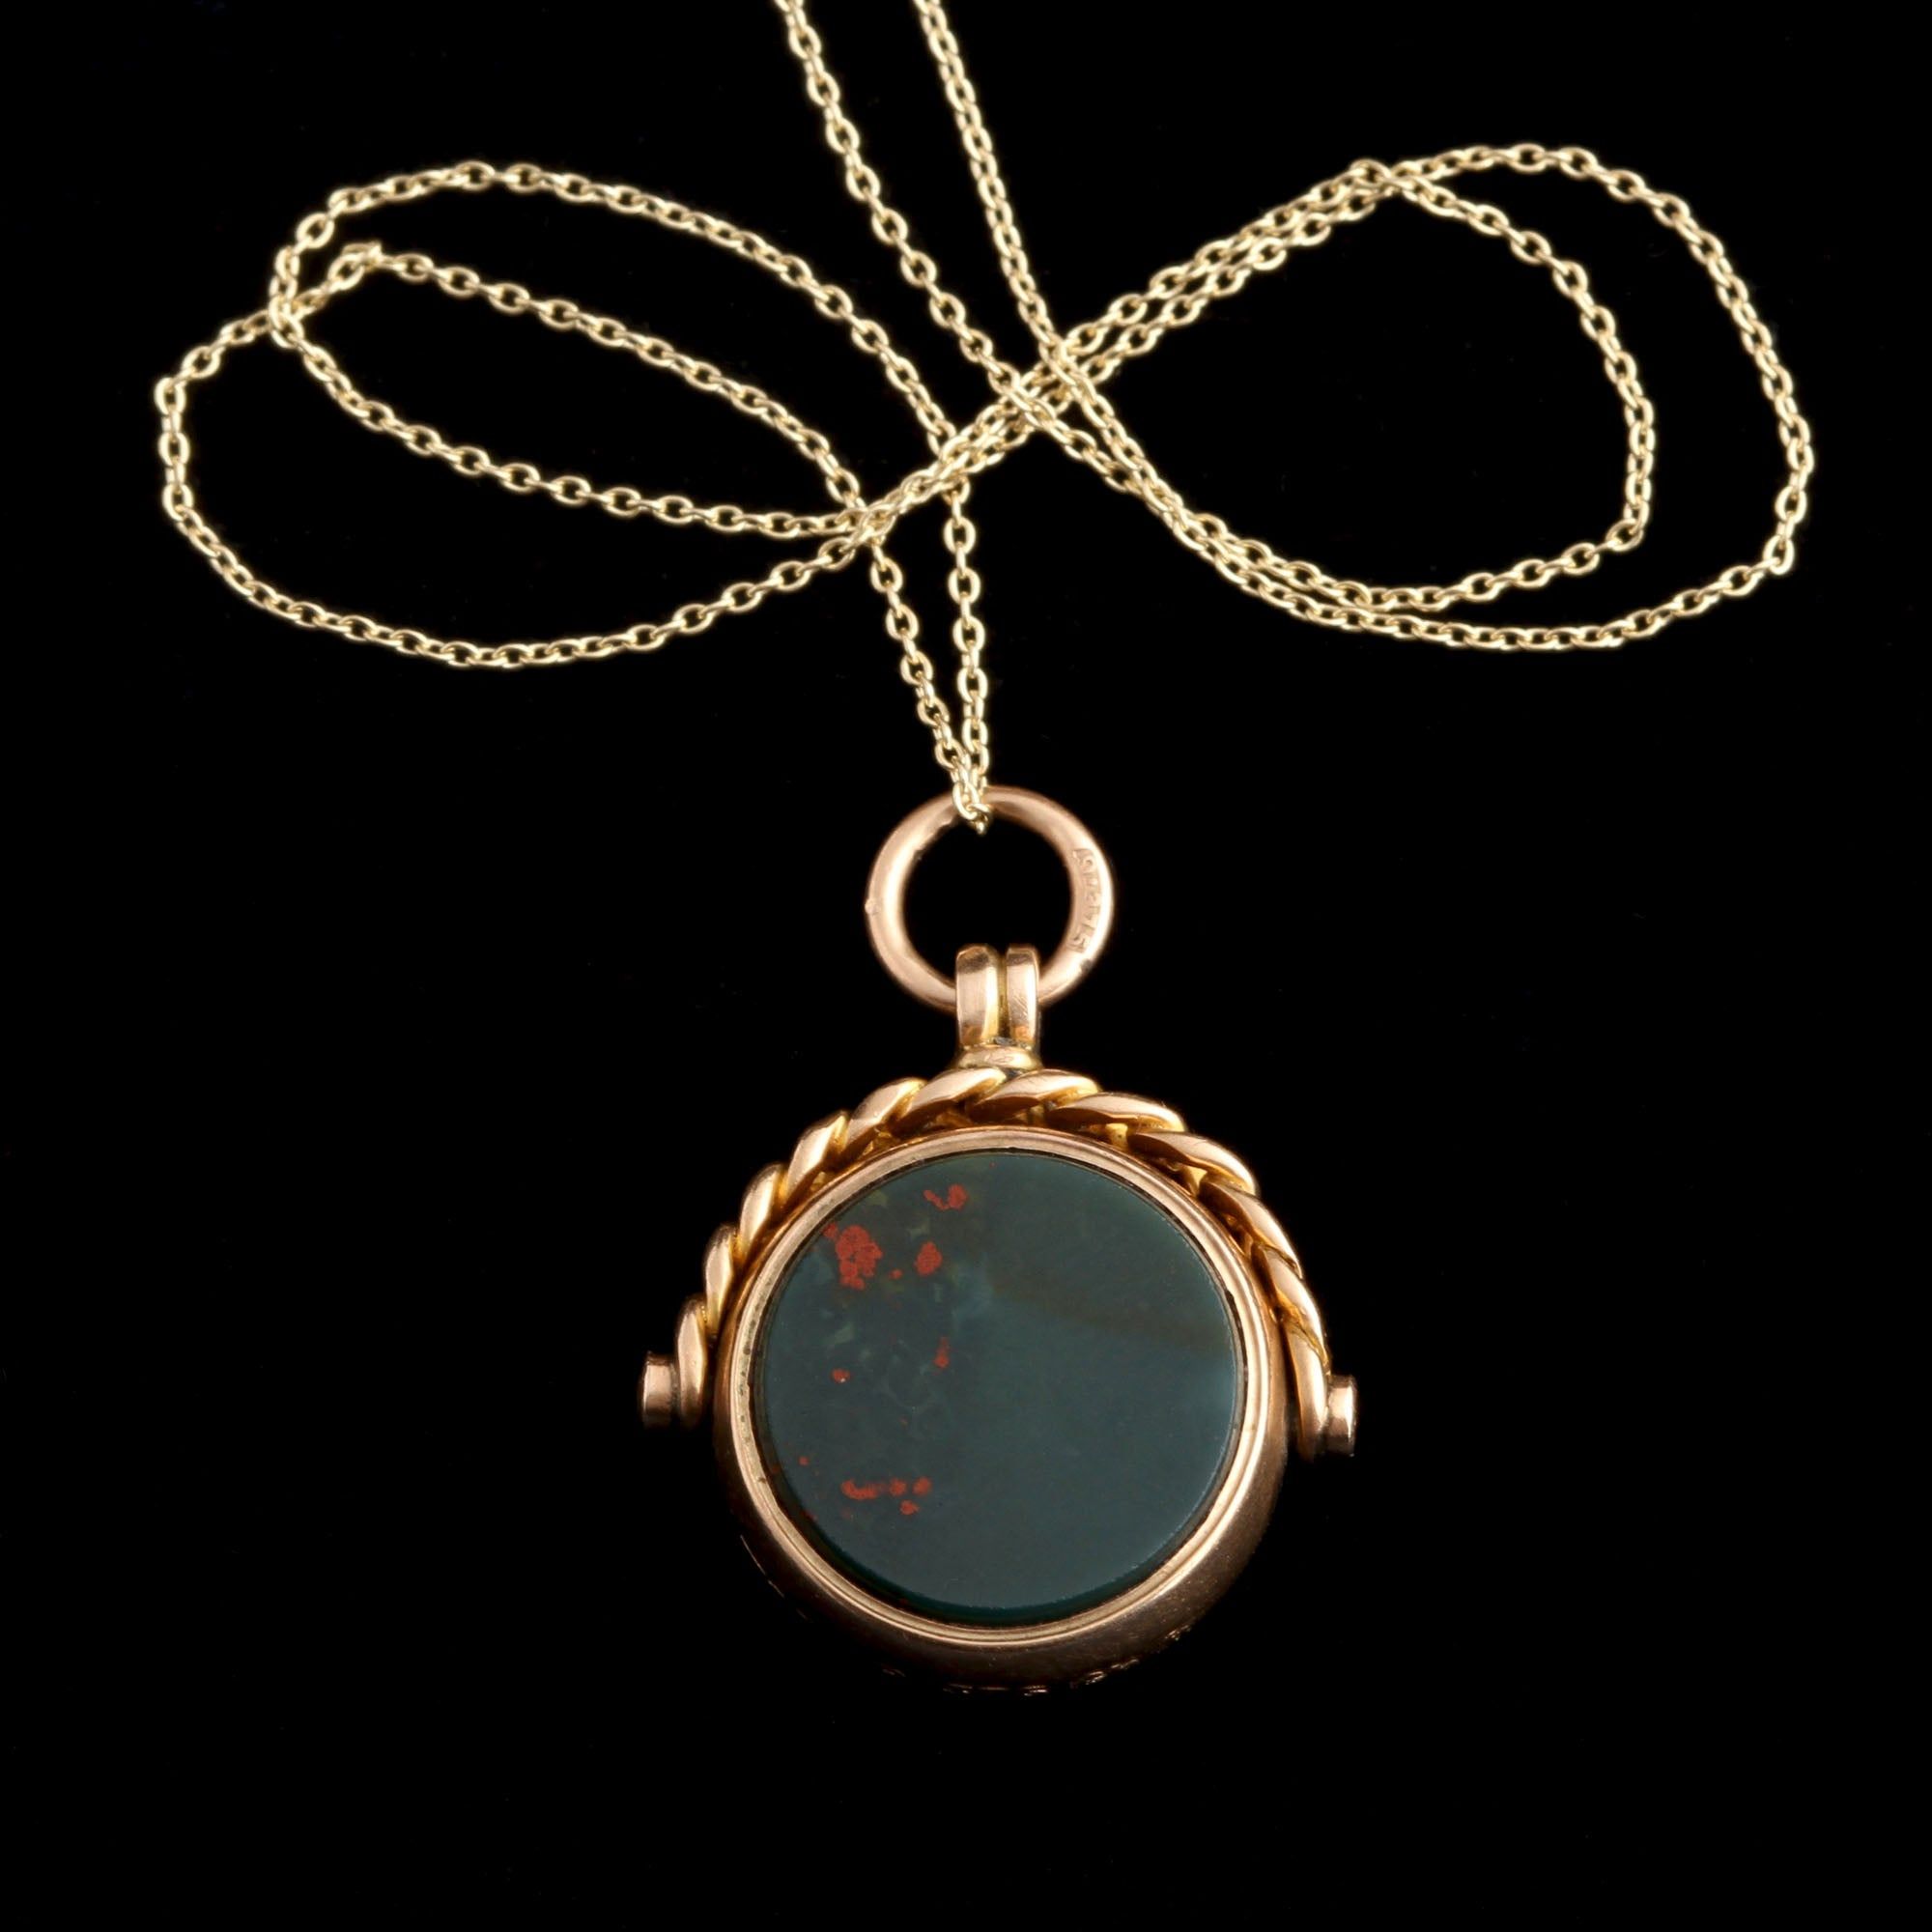 Victorian "GJNF" Spinner Fob Necklace